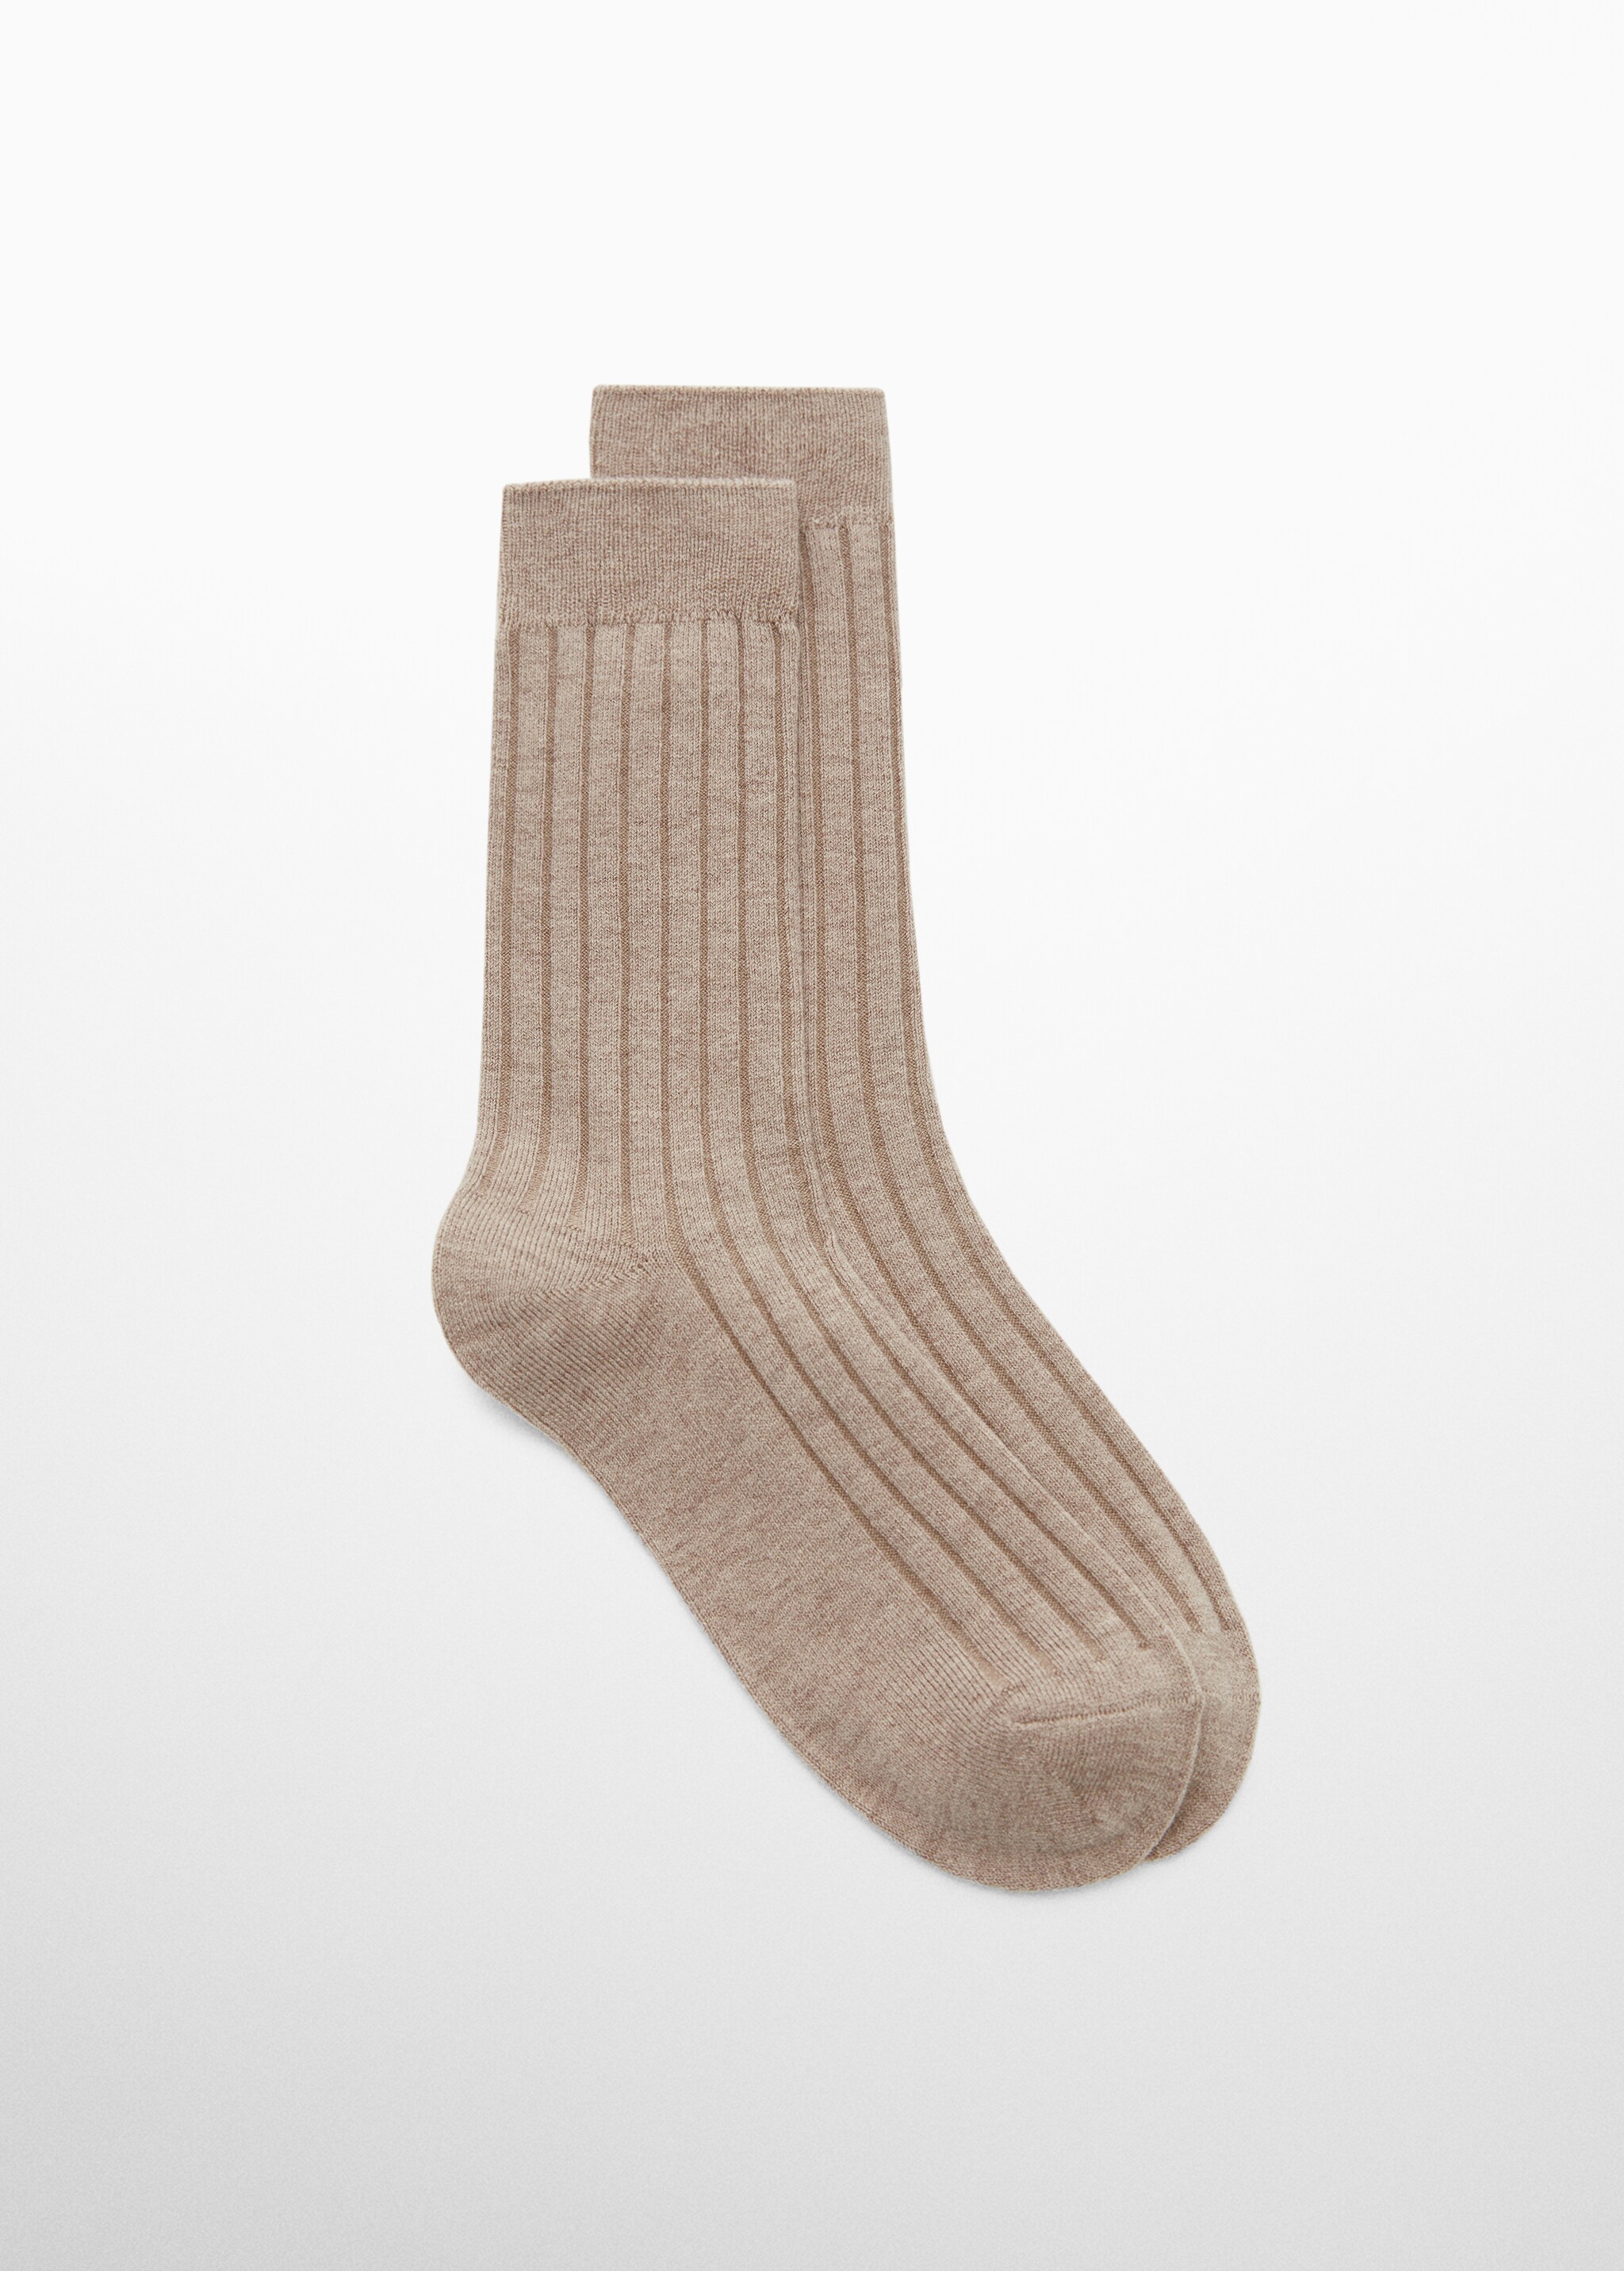 Ribbed socks - Article without model